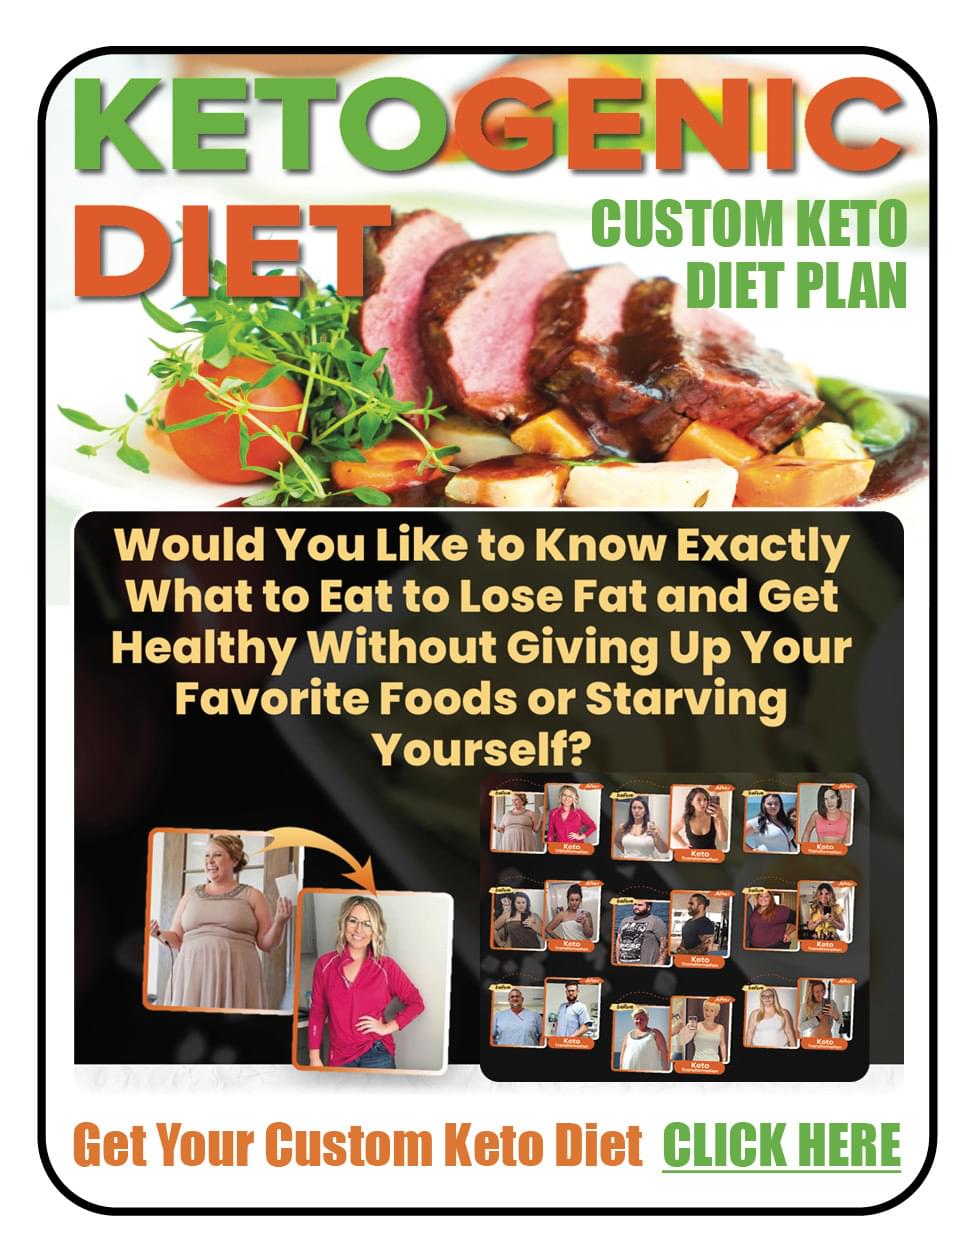 Keto Diet Ad in Coffee News